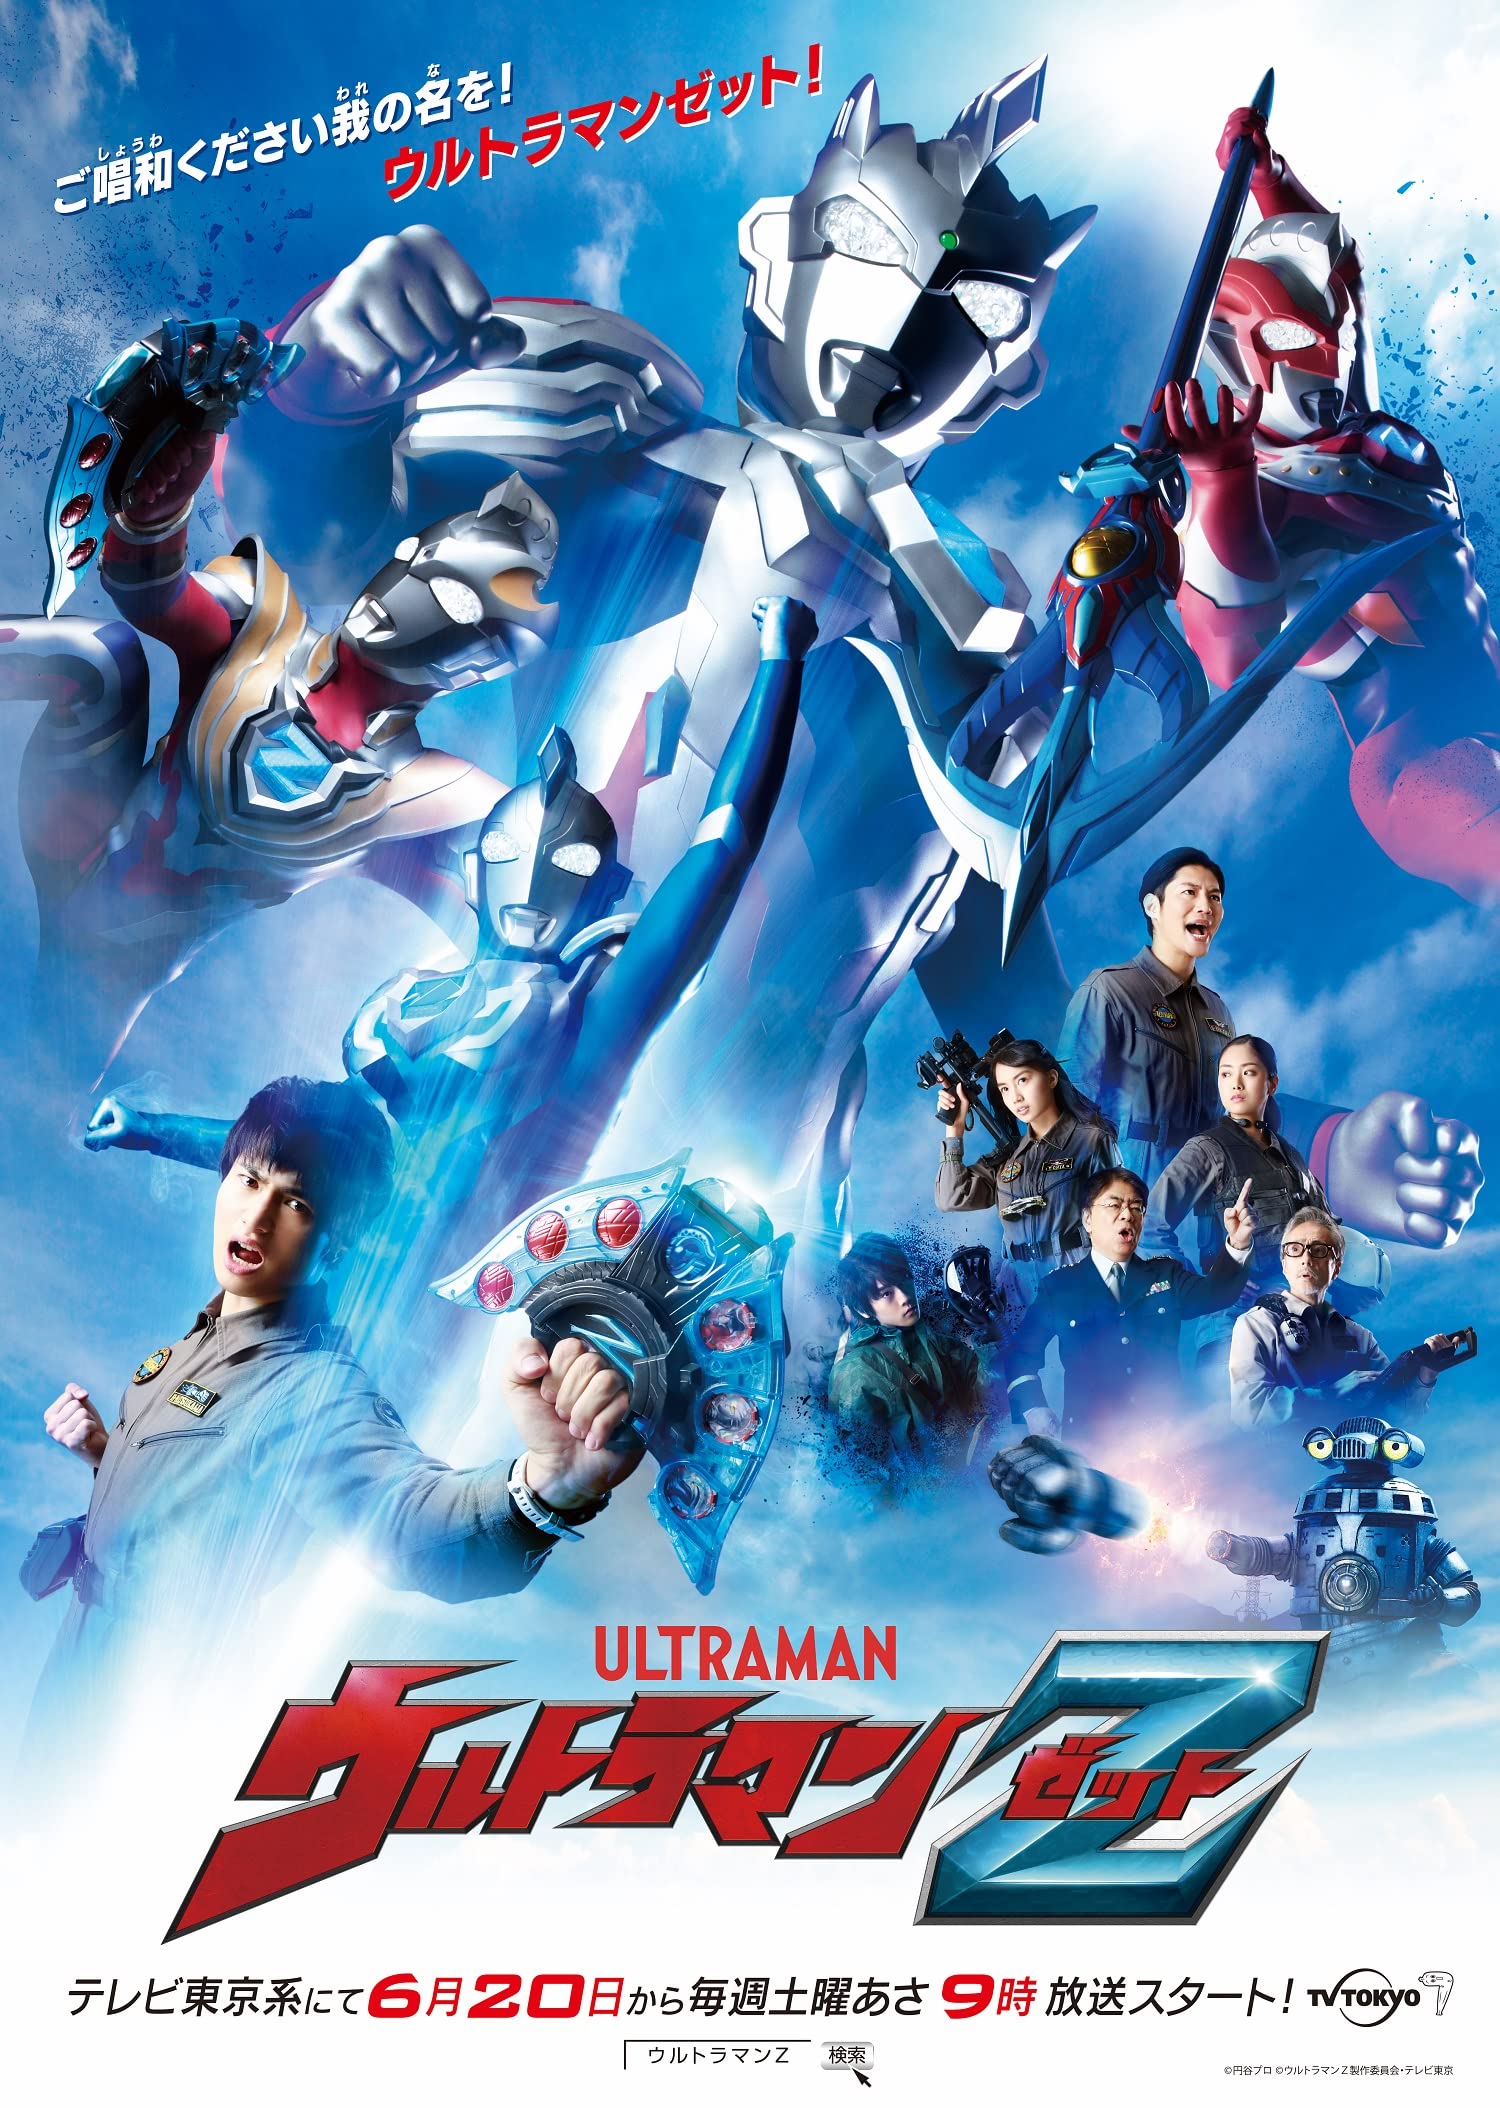 Download Anime Series – Ultraman Z S01 (E07 ADDED) Complete Multi Audio [Hindi-English-Japanese] Series 720p WEB DL download